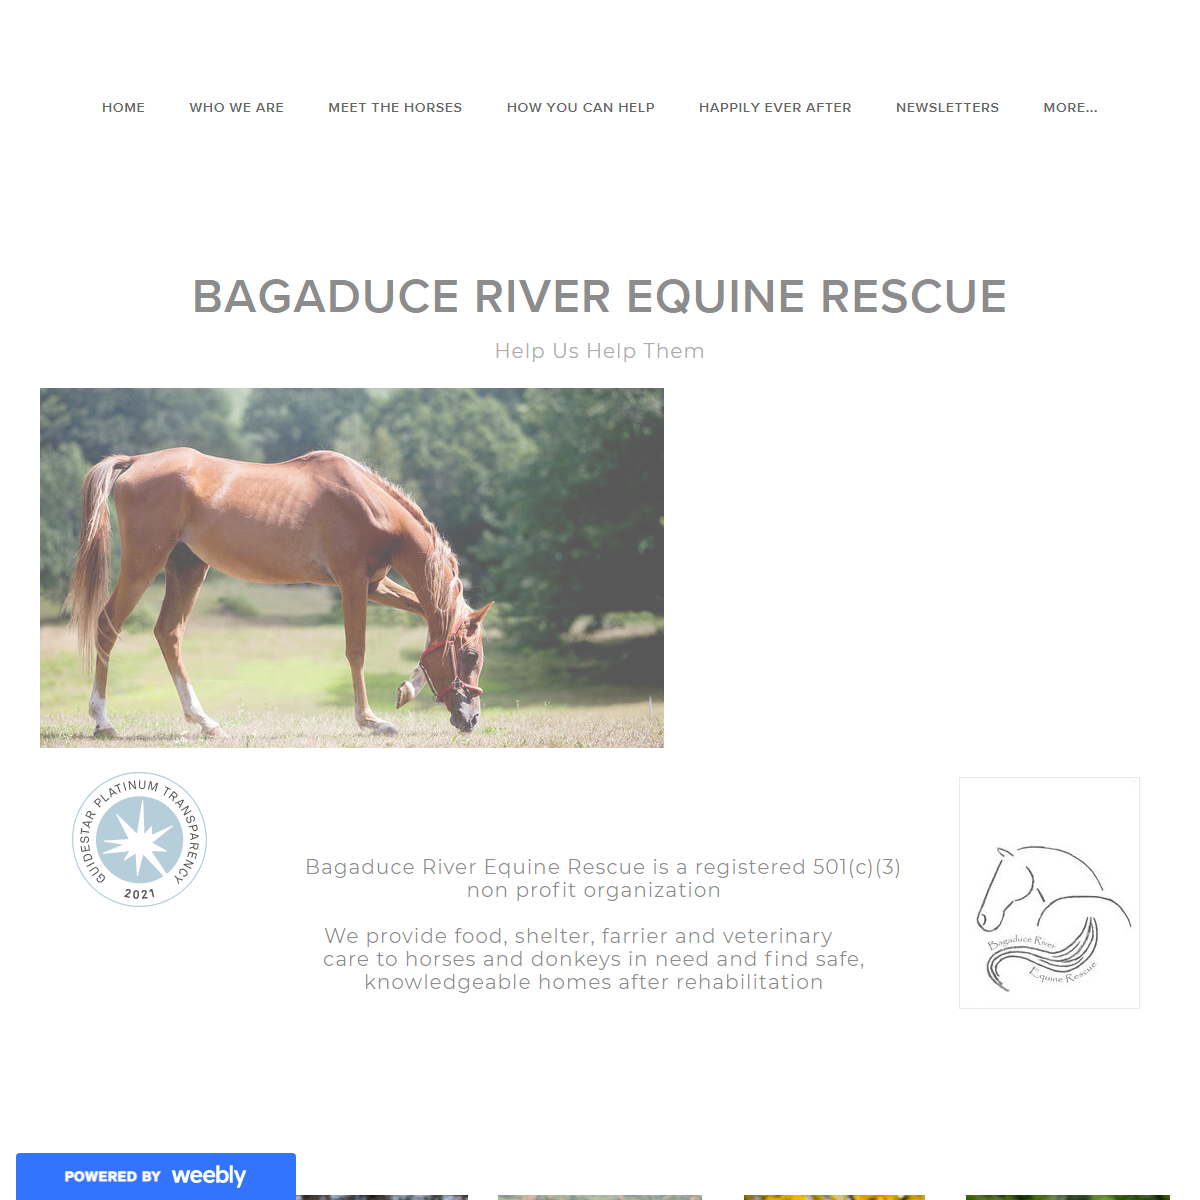 A complete backup of https://bagaduceriverequinerescue.weebly.com/